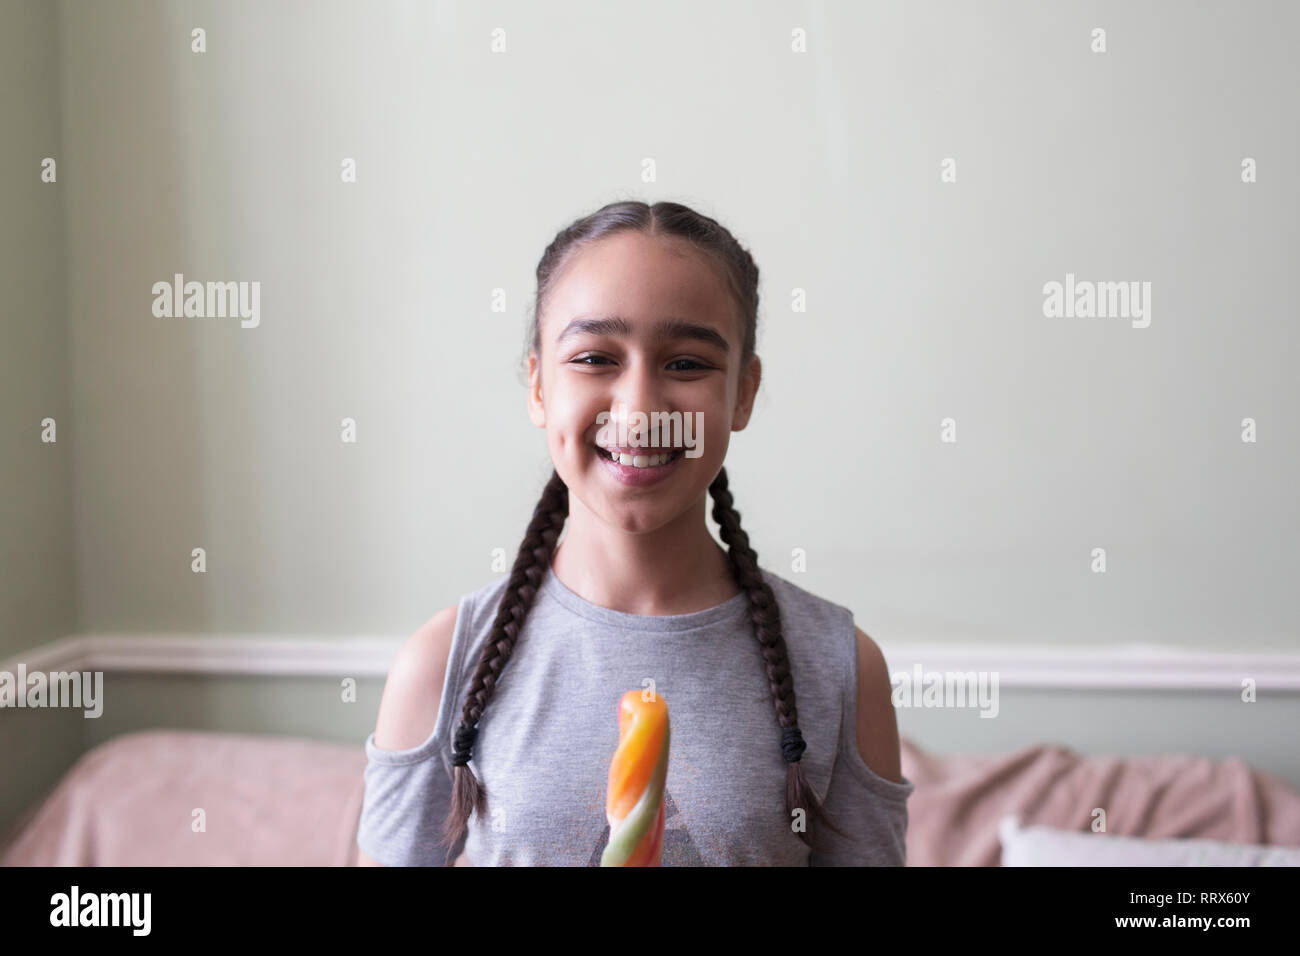 Portrait smiling, confident tween girl eating flavored ice Stock Photo